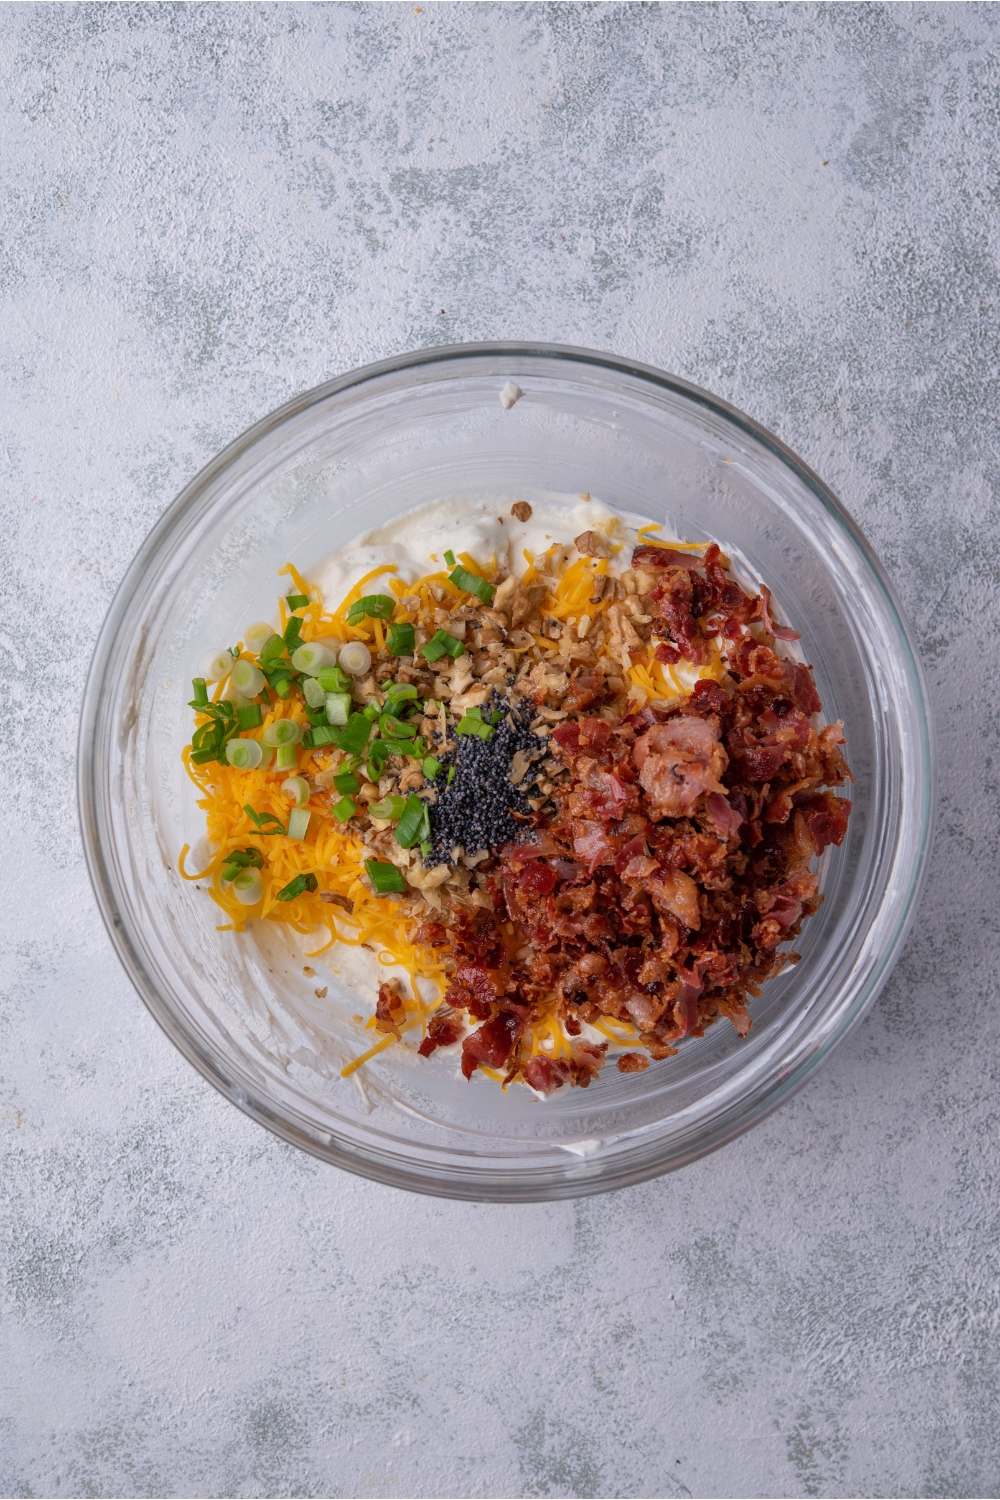 Clear bowl filled with a sour cream mixture, chopped bacon, shredded cheese, nuts, green onion, and poppyseeds.